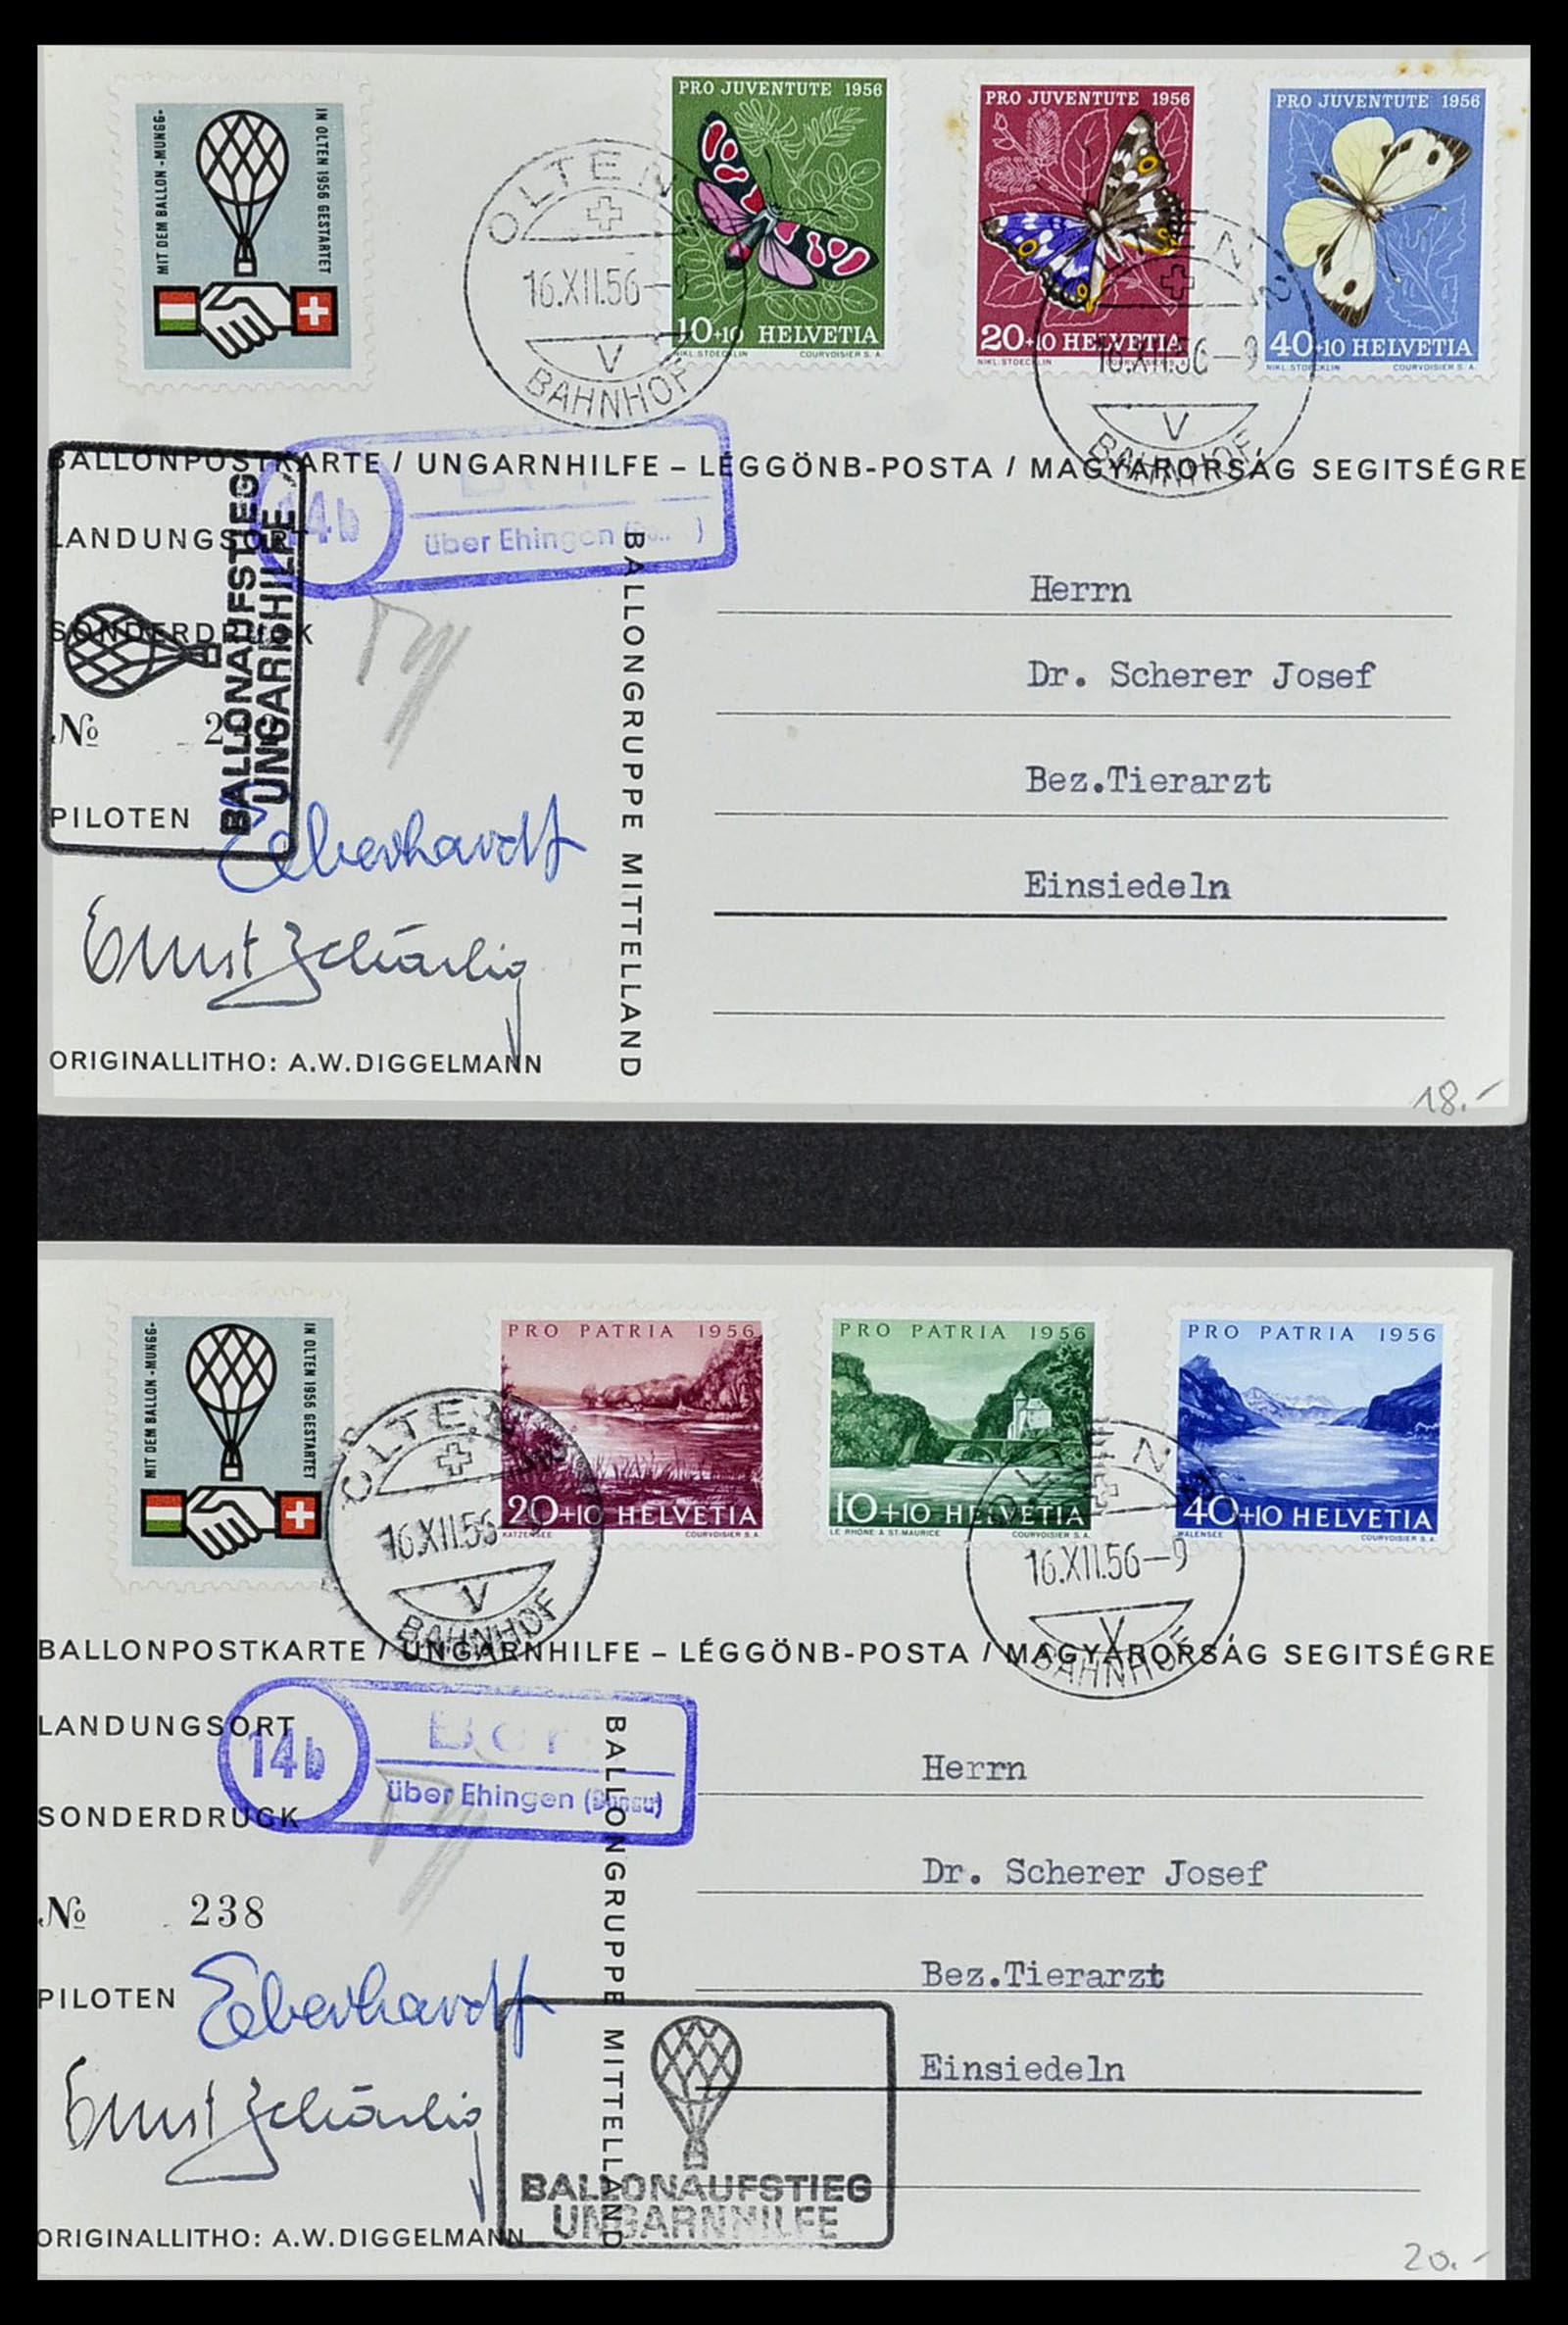 34141 063 - Stamp collection 34141 Switzerland airmail covers 1920-1960.